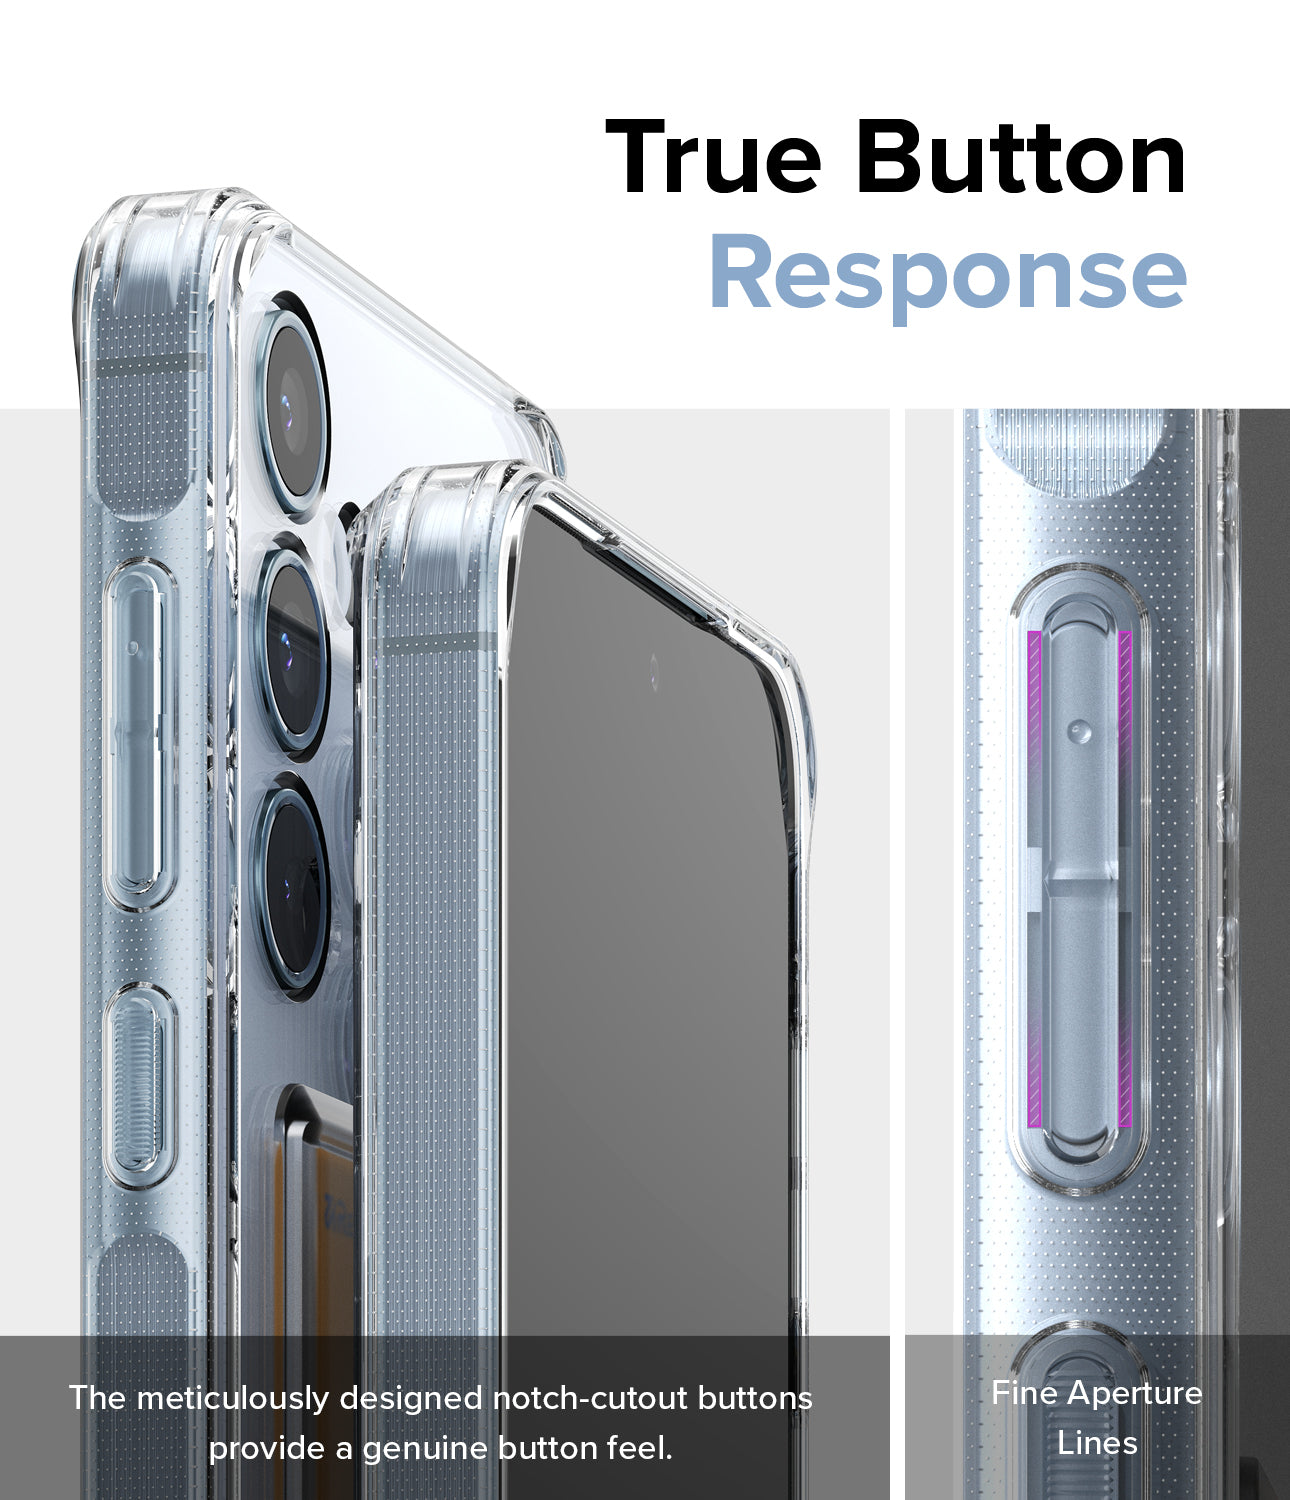 Galaxy A35 Case | Fusion Card - True Button Response. The meticulously designed notch-cutout buttons provide a genuine button feel. Fine Aperture Lines